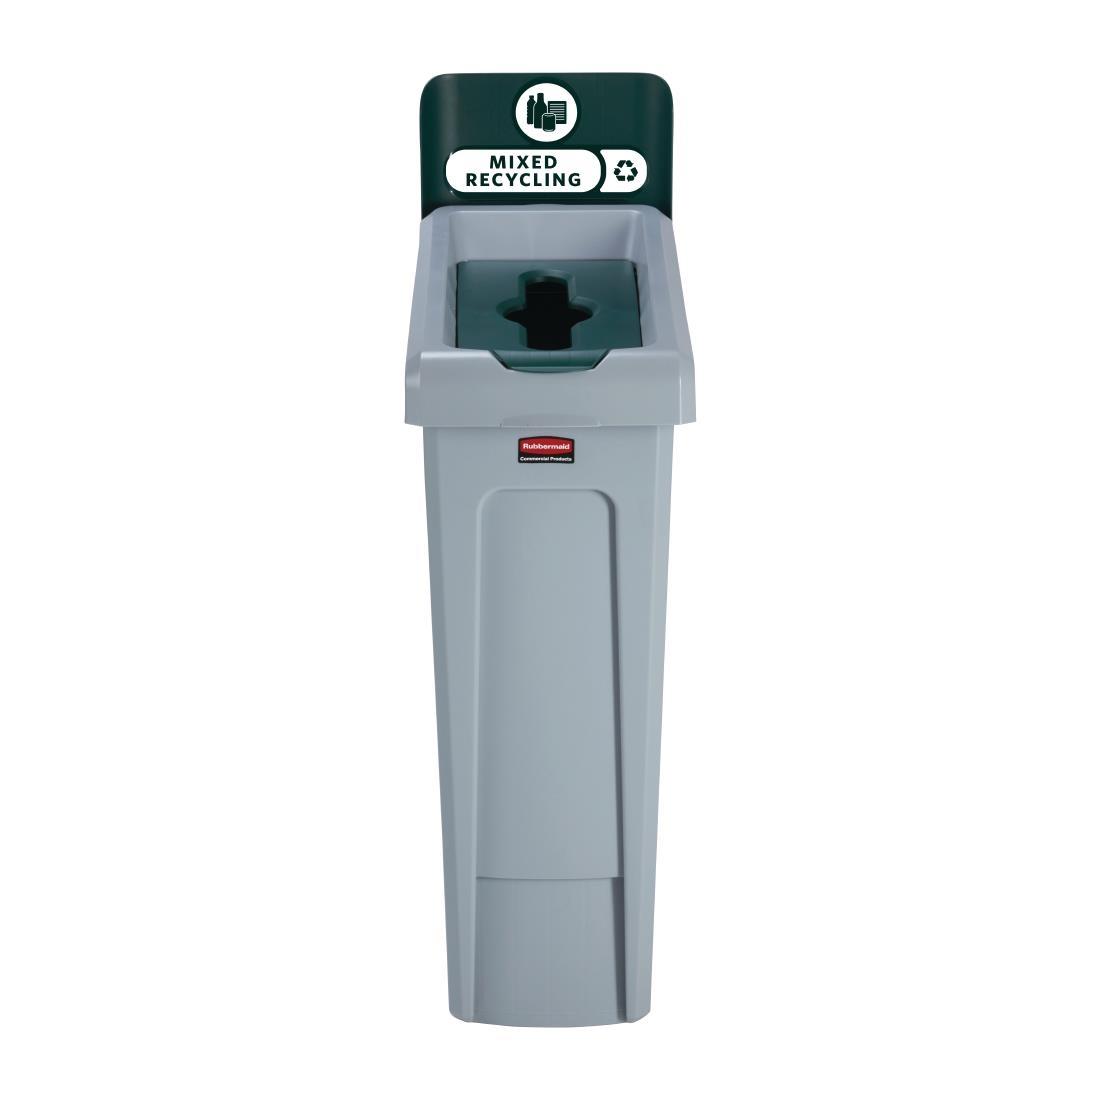 Rubbermaid Slim Jim Mixed Recycling Station Green 87Ltr - DY084  - 2